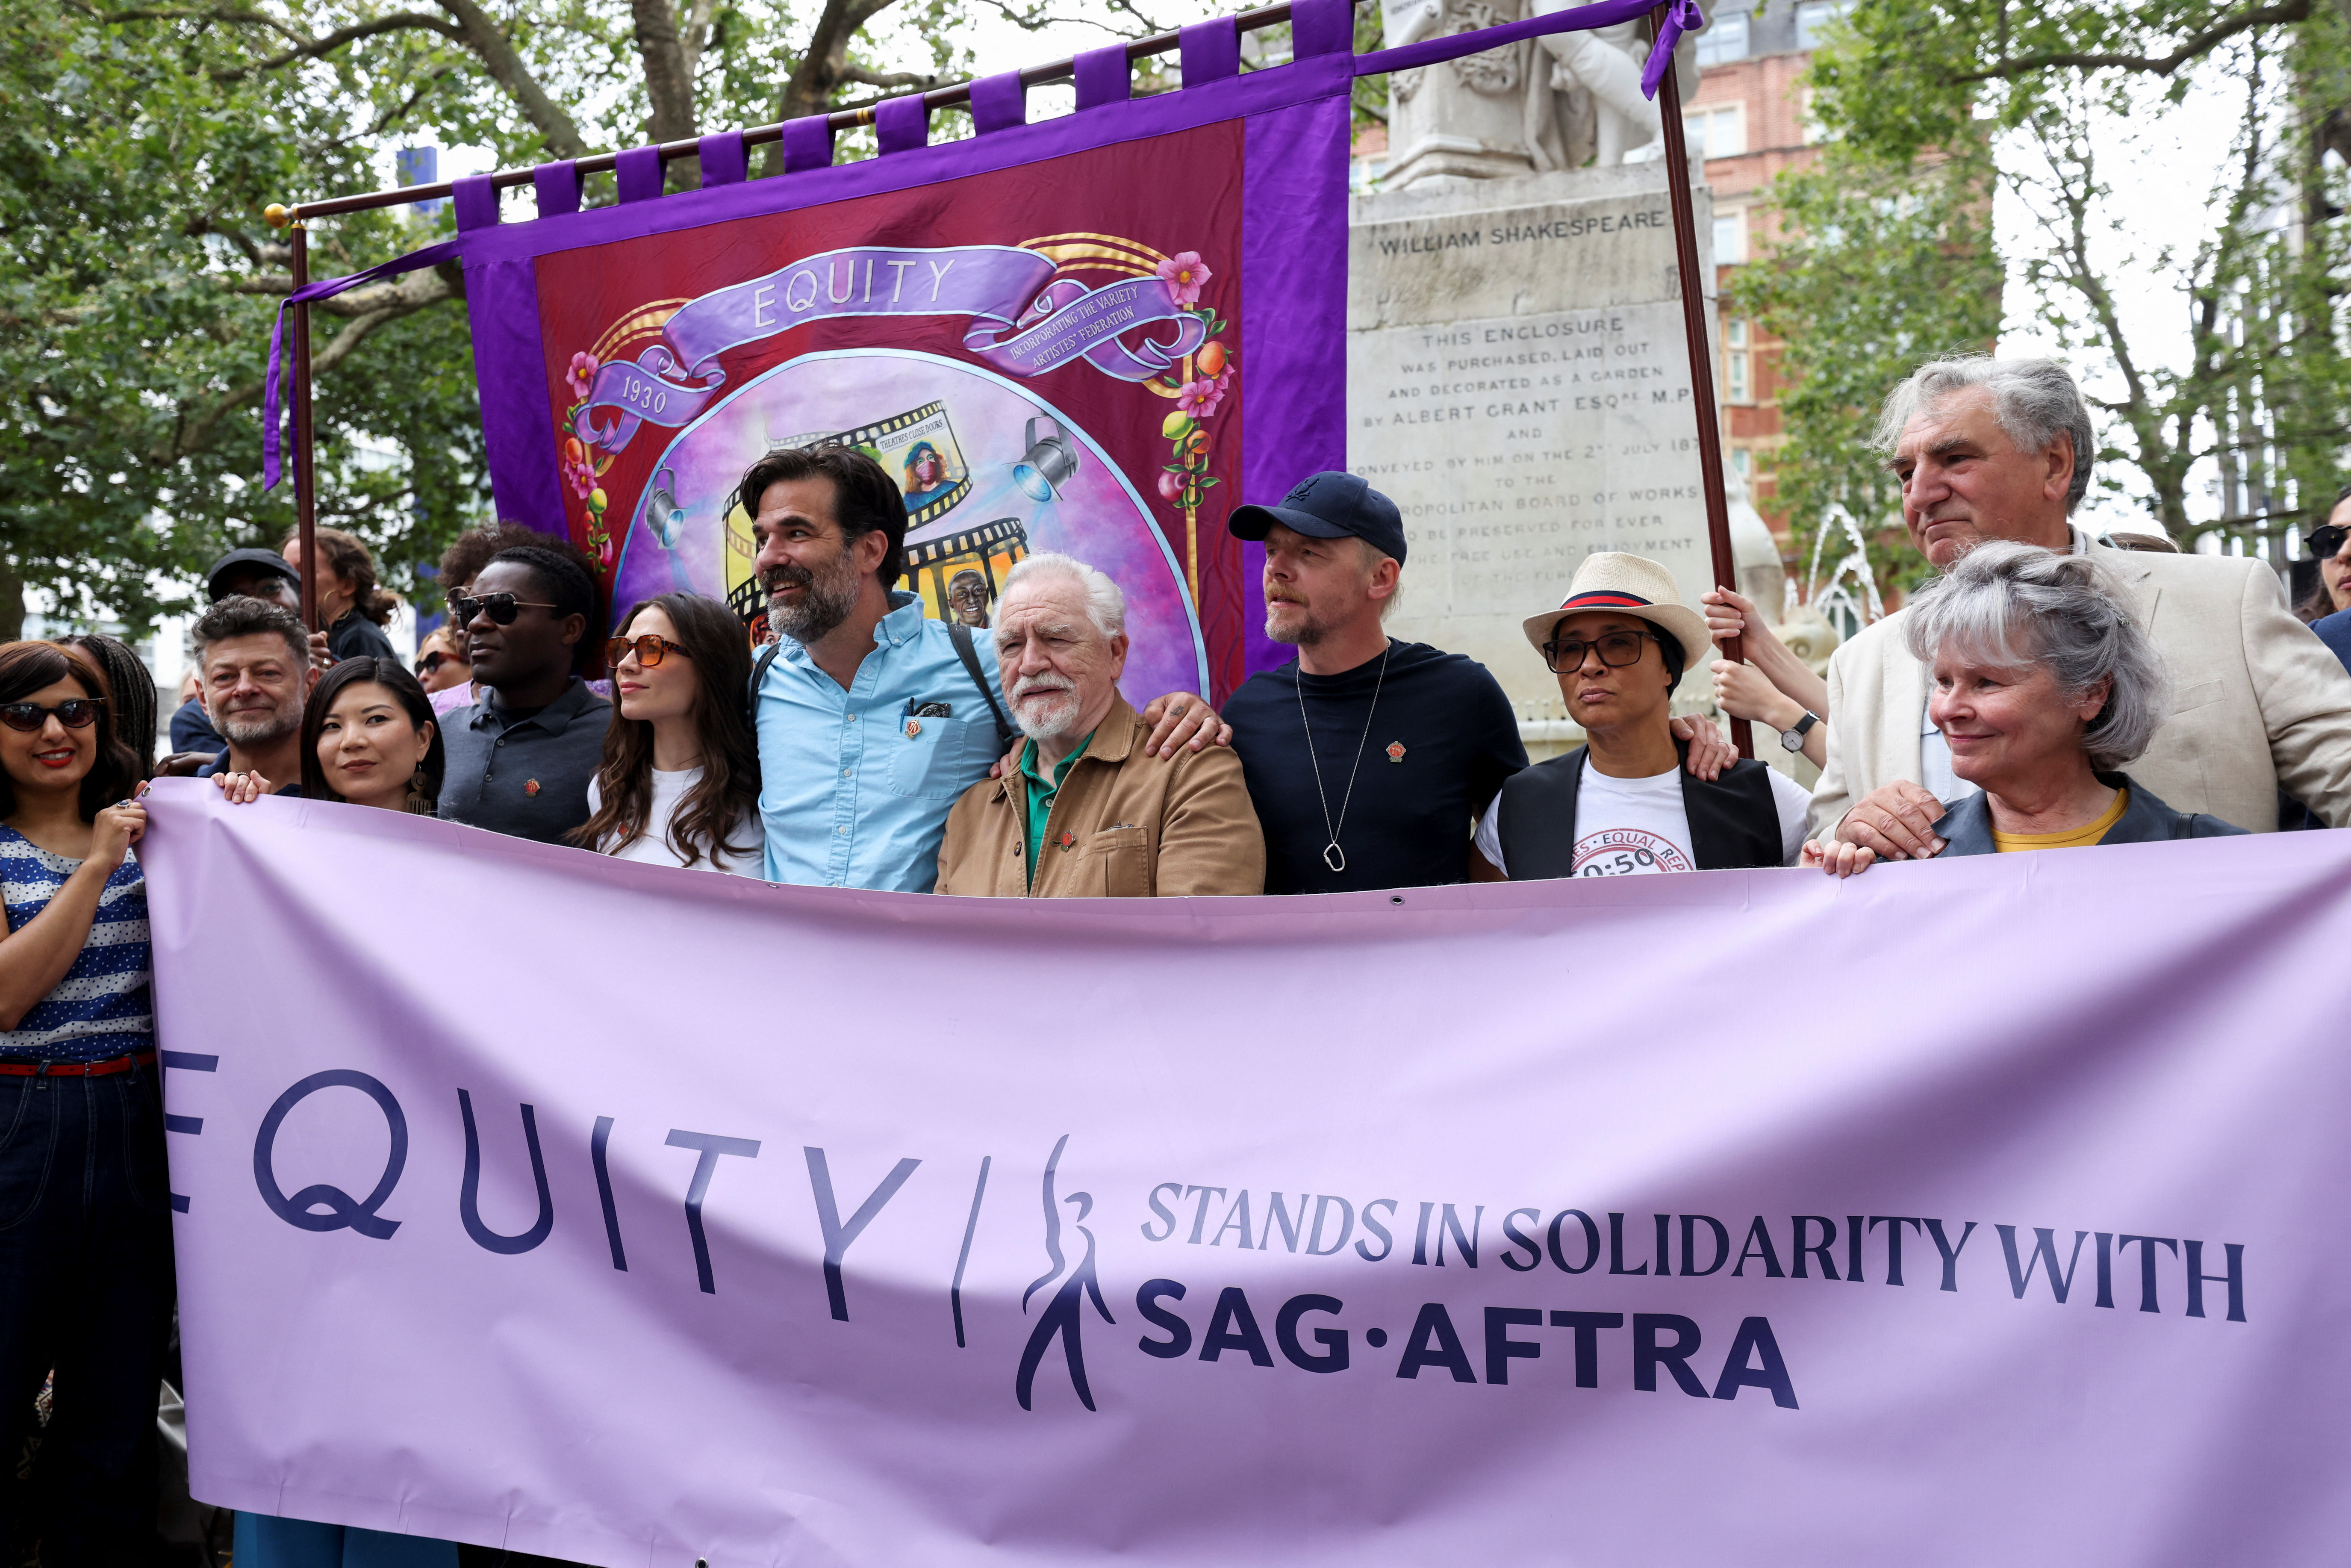 Equity rally in solidarity with the SAG-AFTRA strikes, London